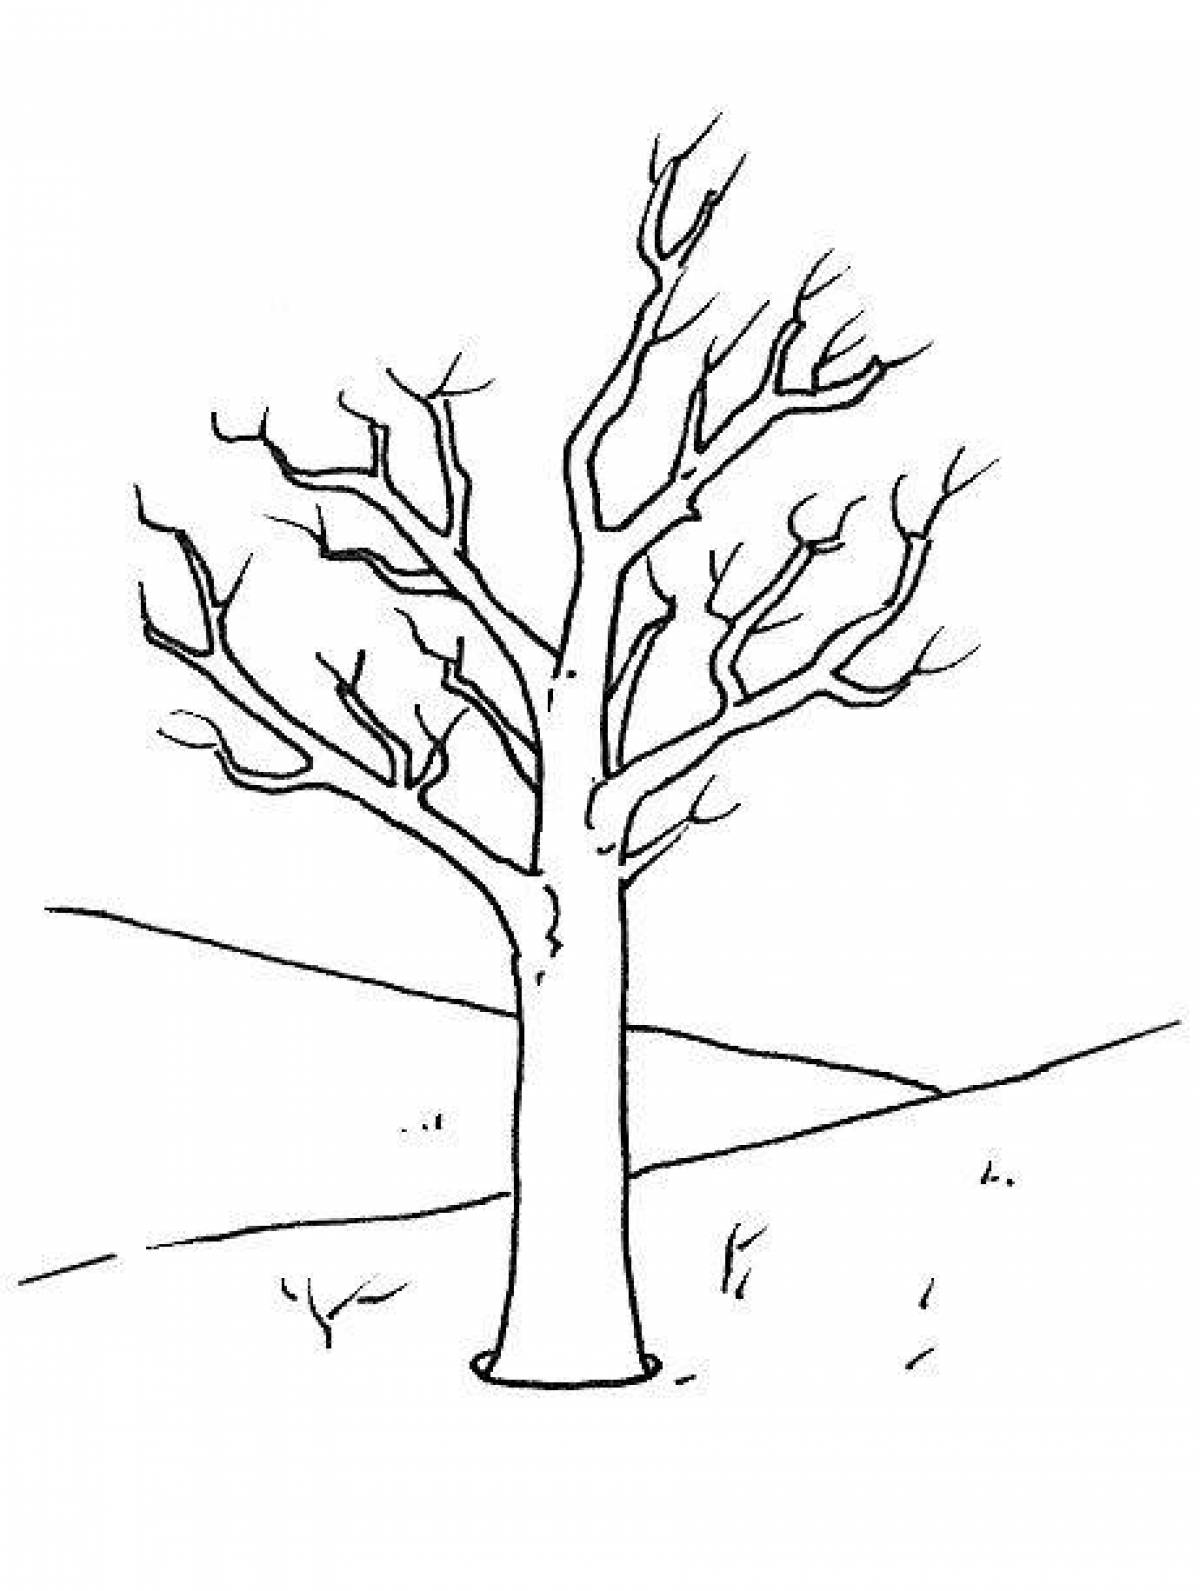 Coloring book shining tree without leaves for children